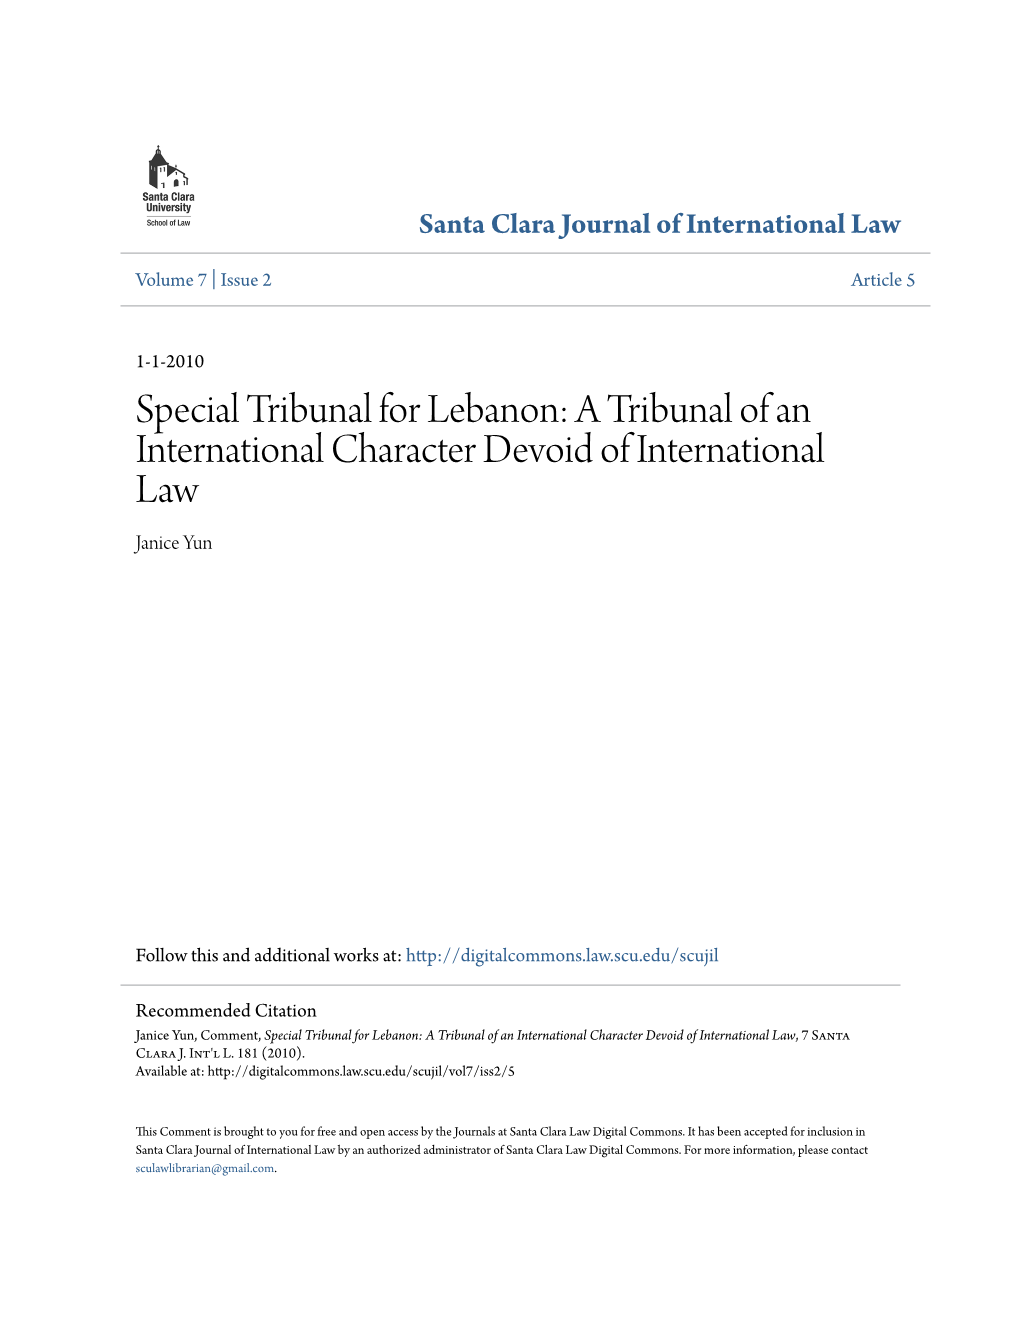 Special Tribunal for Lebanon: a Tribunal of an International Character Devoid of International Law Janice Yun